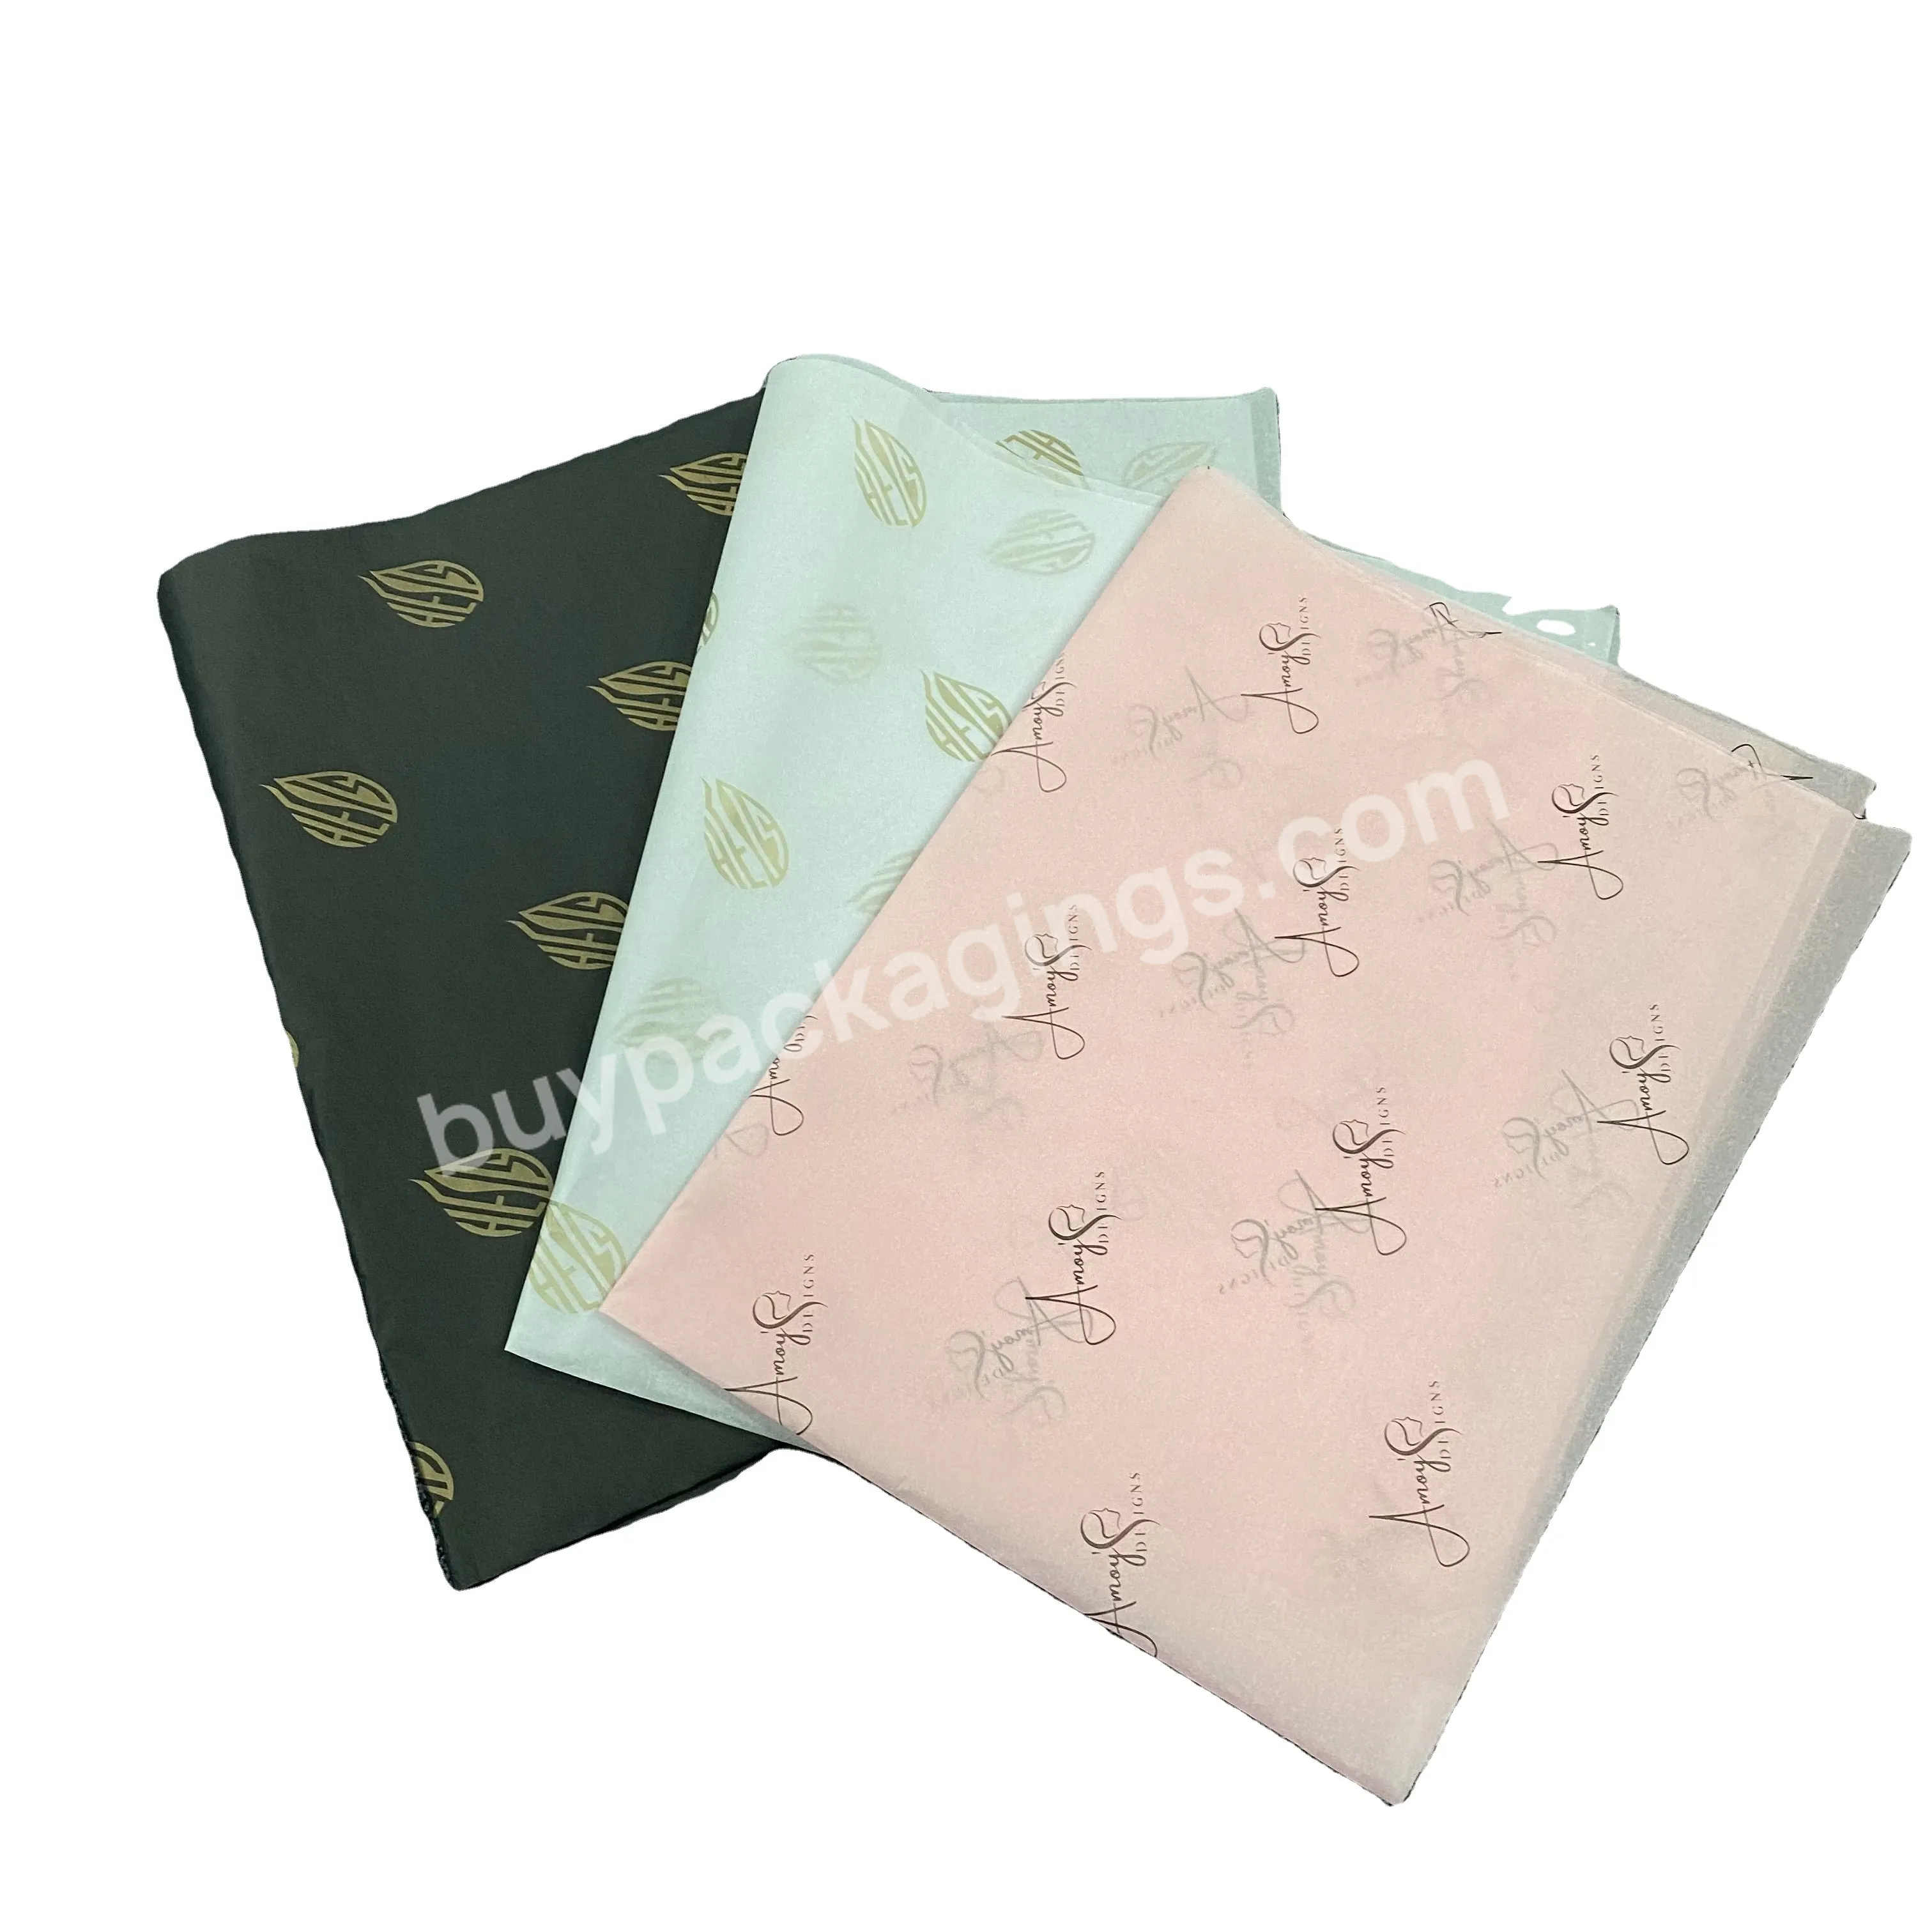 Beautiful Design High Level Low Moq 17g 50*70cm Wrapping Tissue Paper Custom Size Logo Print Gift Packaging With Brand - Buy Low Moq 17g 50*70cm Wrapping Tissue Paper,Customize Any Size Logo Print,Gift Packaging With Brand.